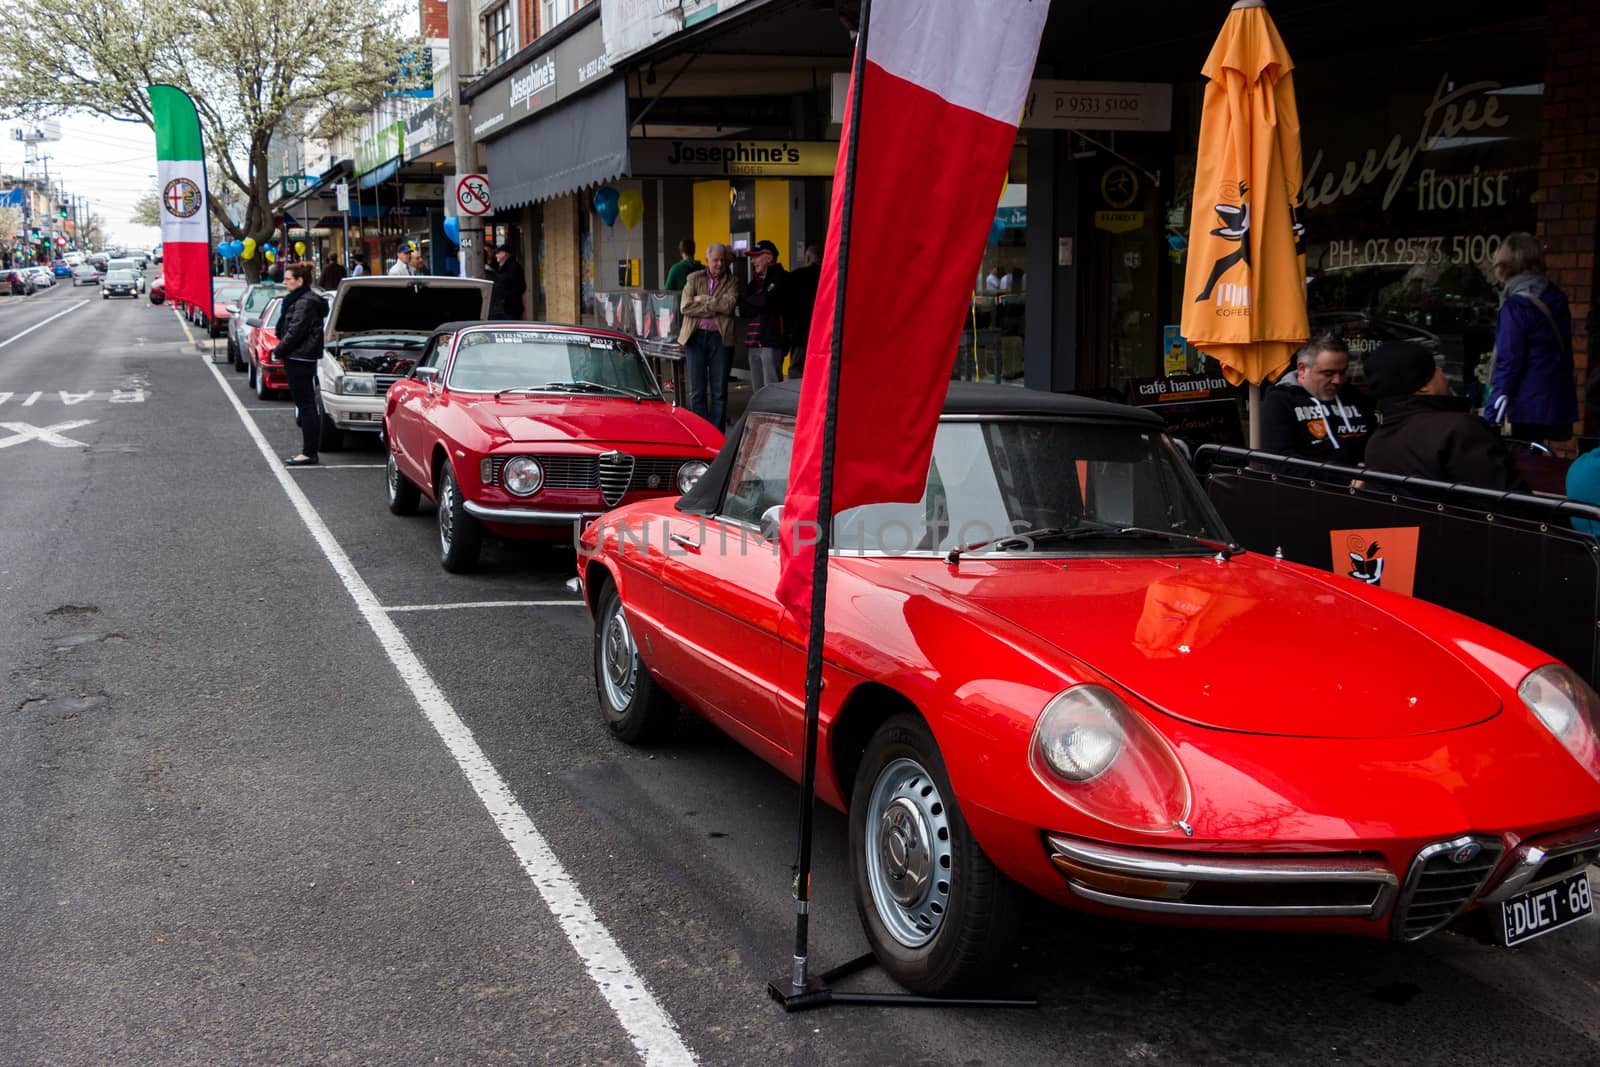 Italian Classic Sports Cars in a Car Show by davidhewison